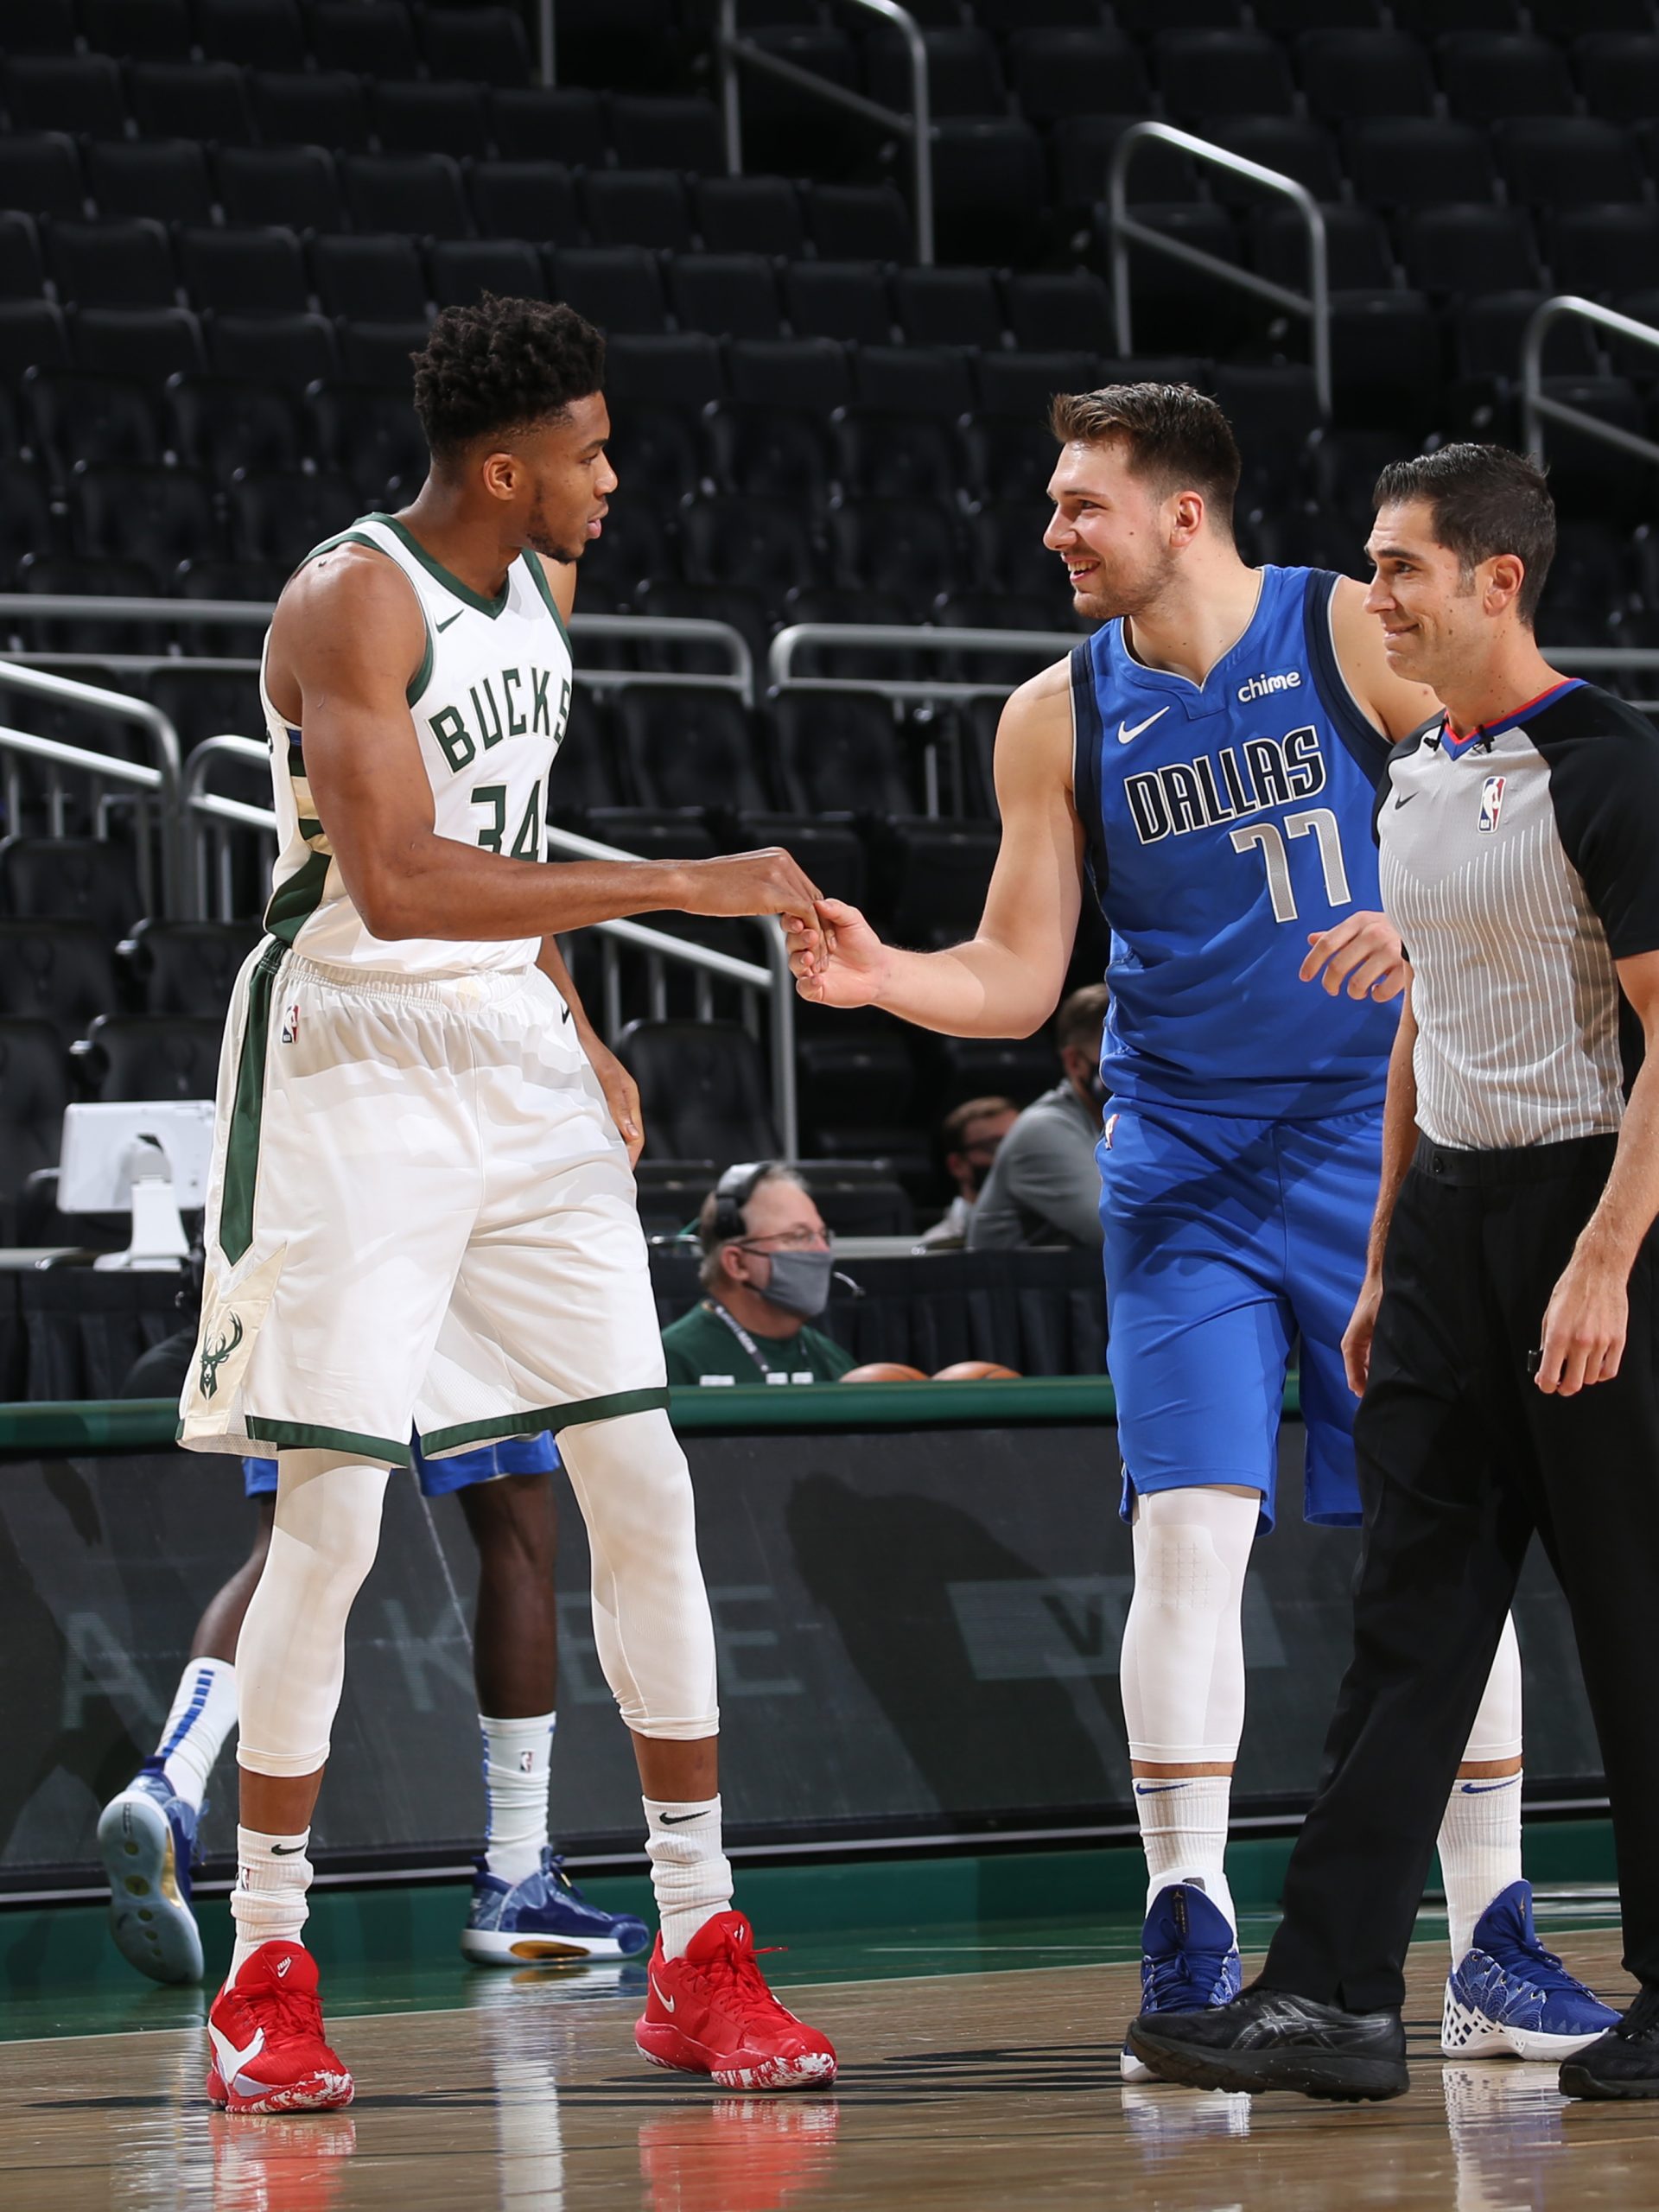 Preview: Giannis Antetokounmpo and Luka Doncic Lead Bucks and Mavs Into Final Encounter